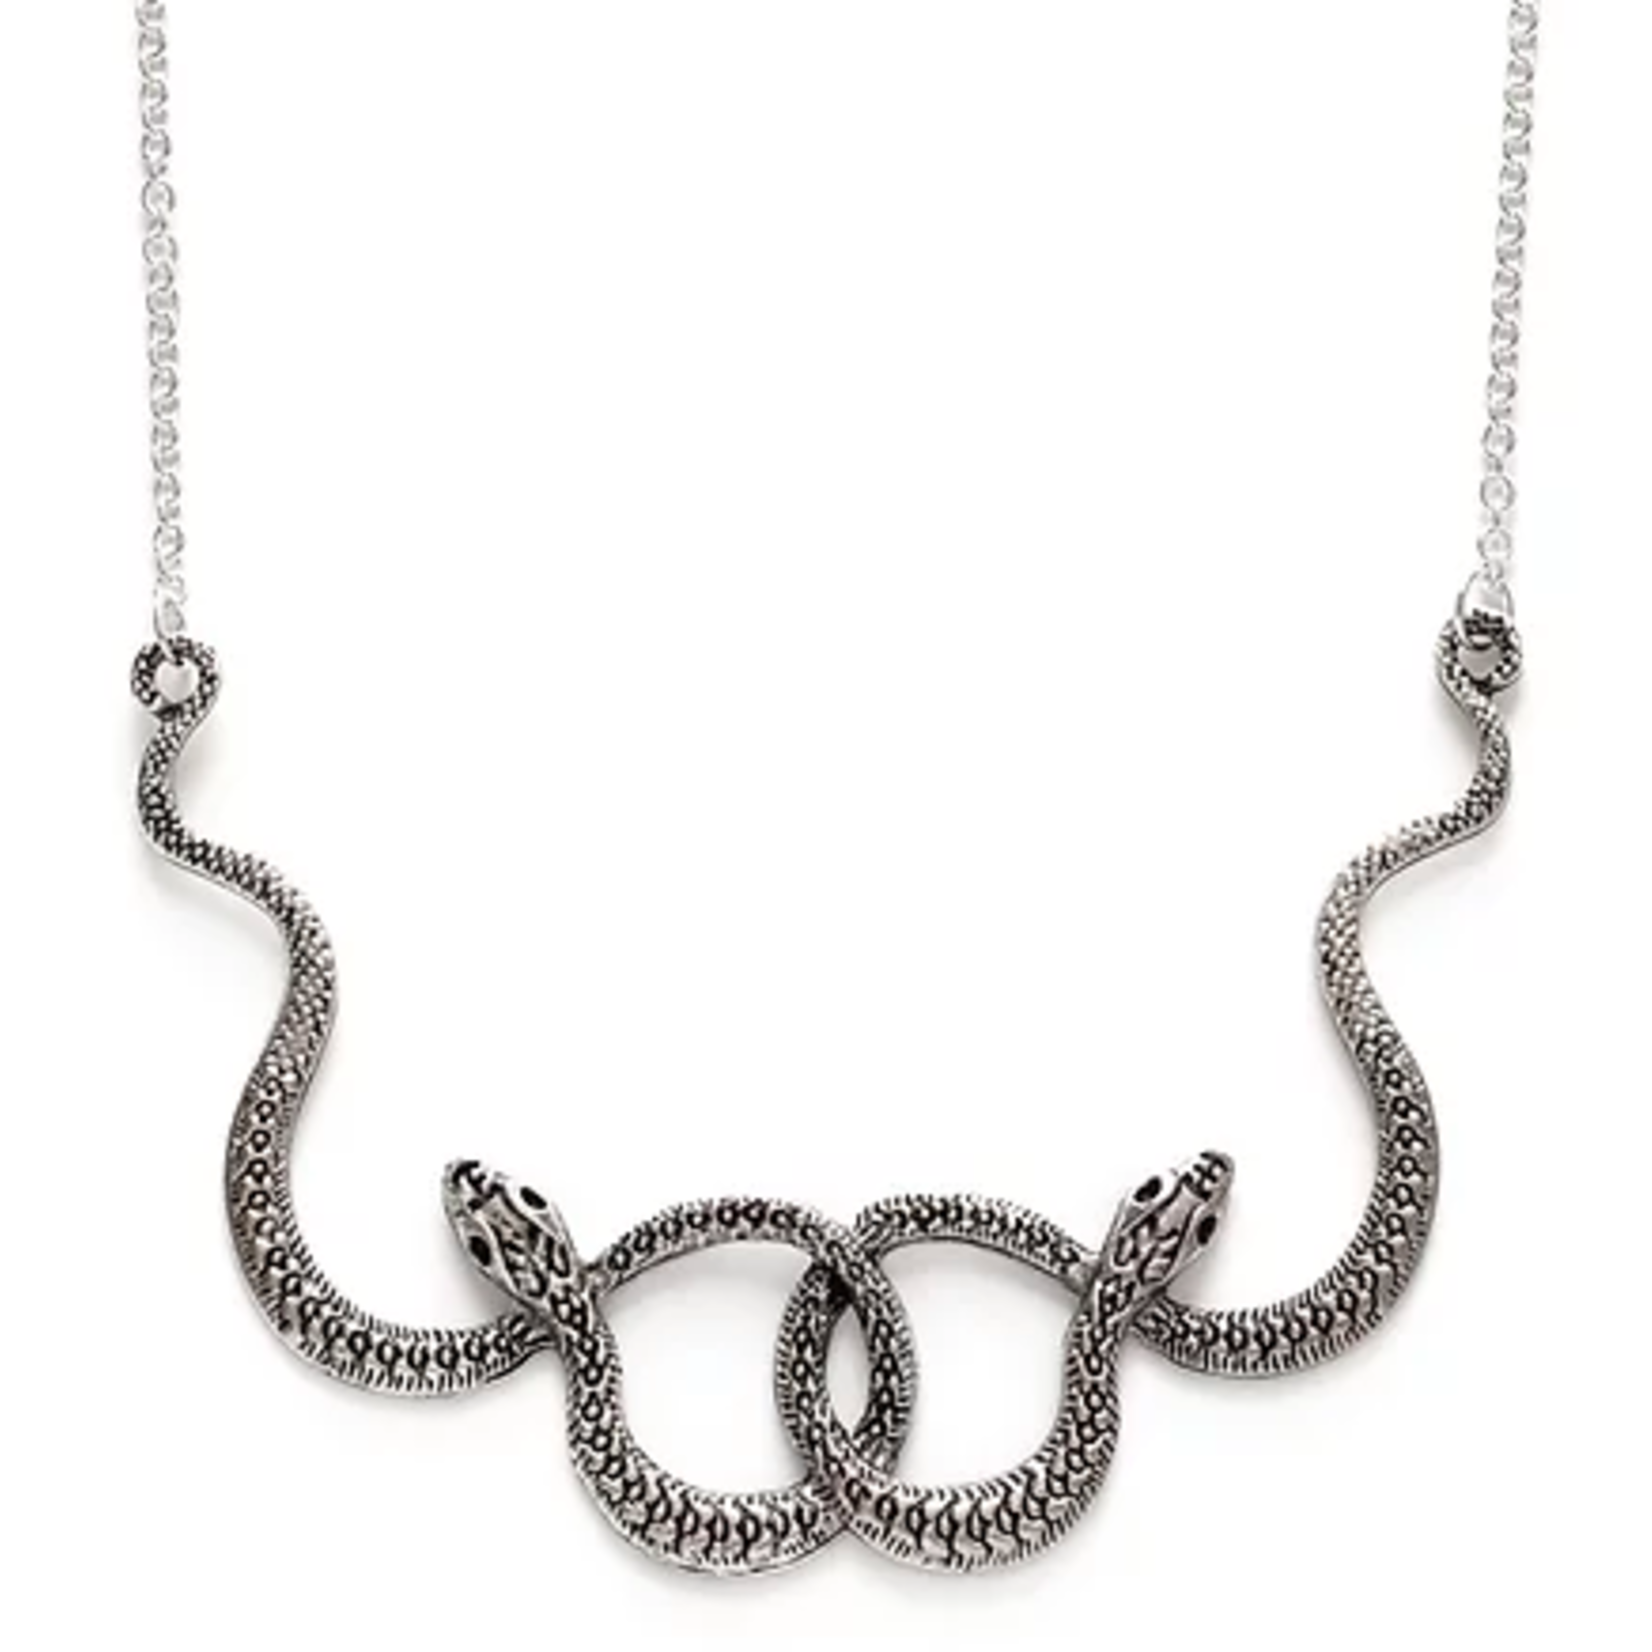 Ophidian Statement Necklace · Silver Plated